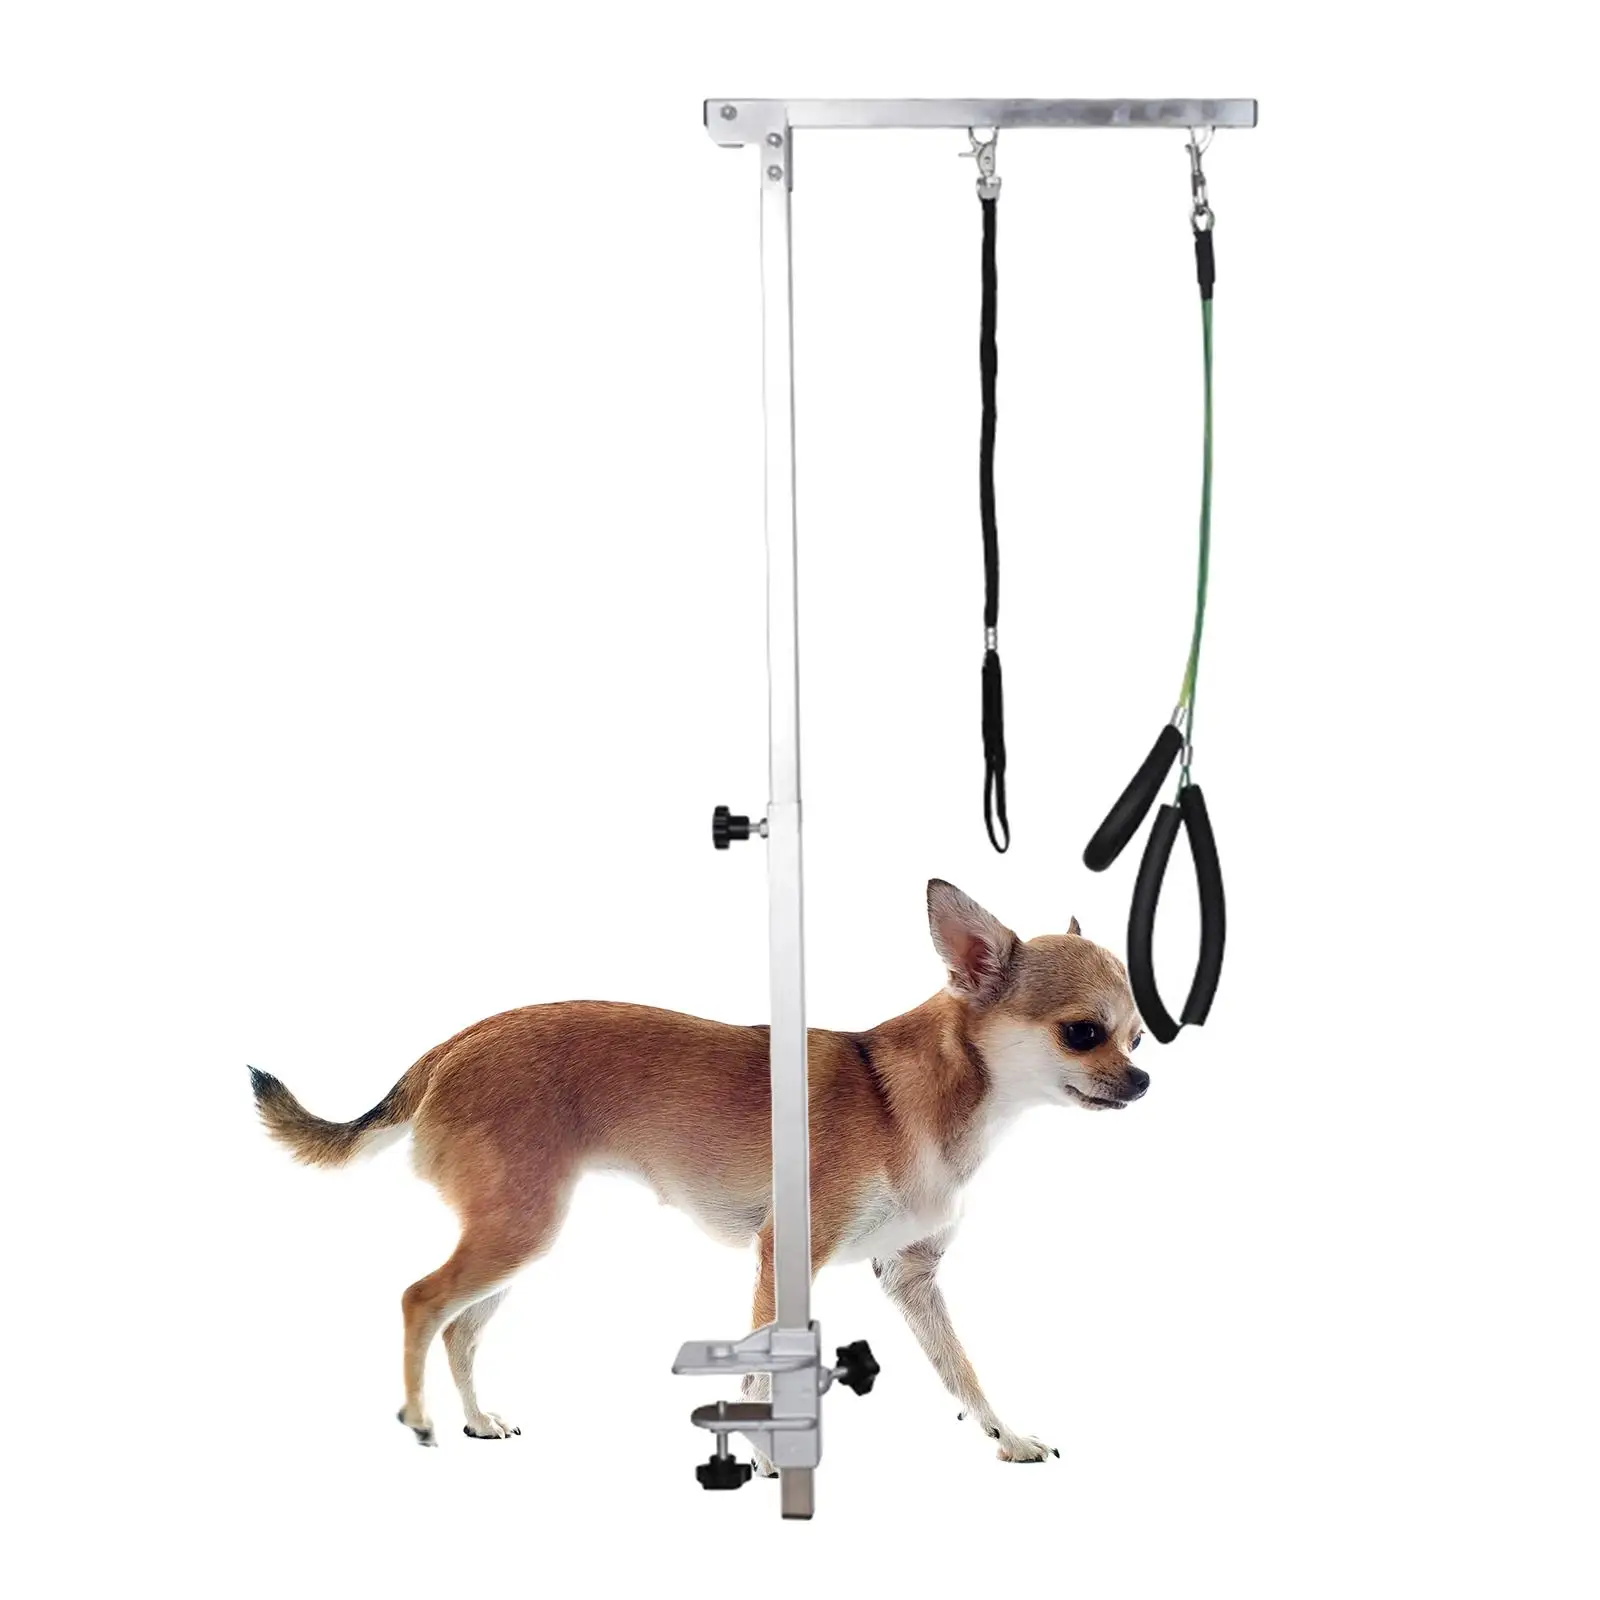 Extensible Pet Dog Grooming Table Bracket Arm with Restraint Rope Adjustable Pet Supplies Universal Grooming Table Bracket